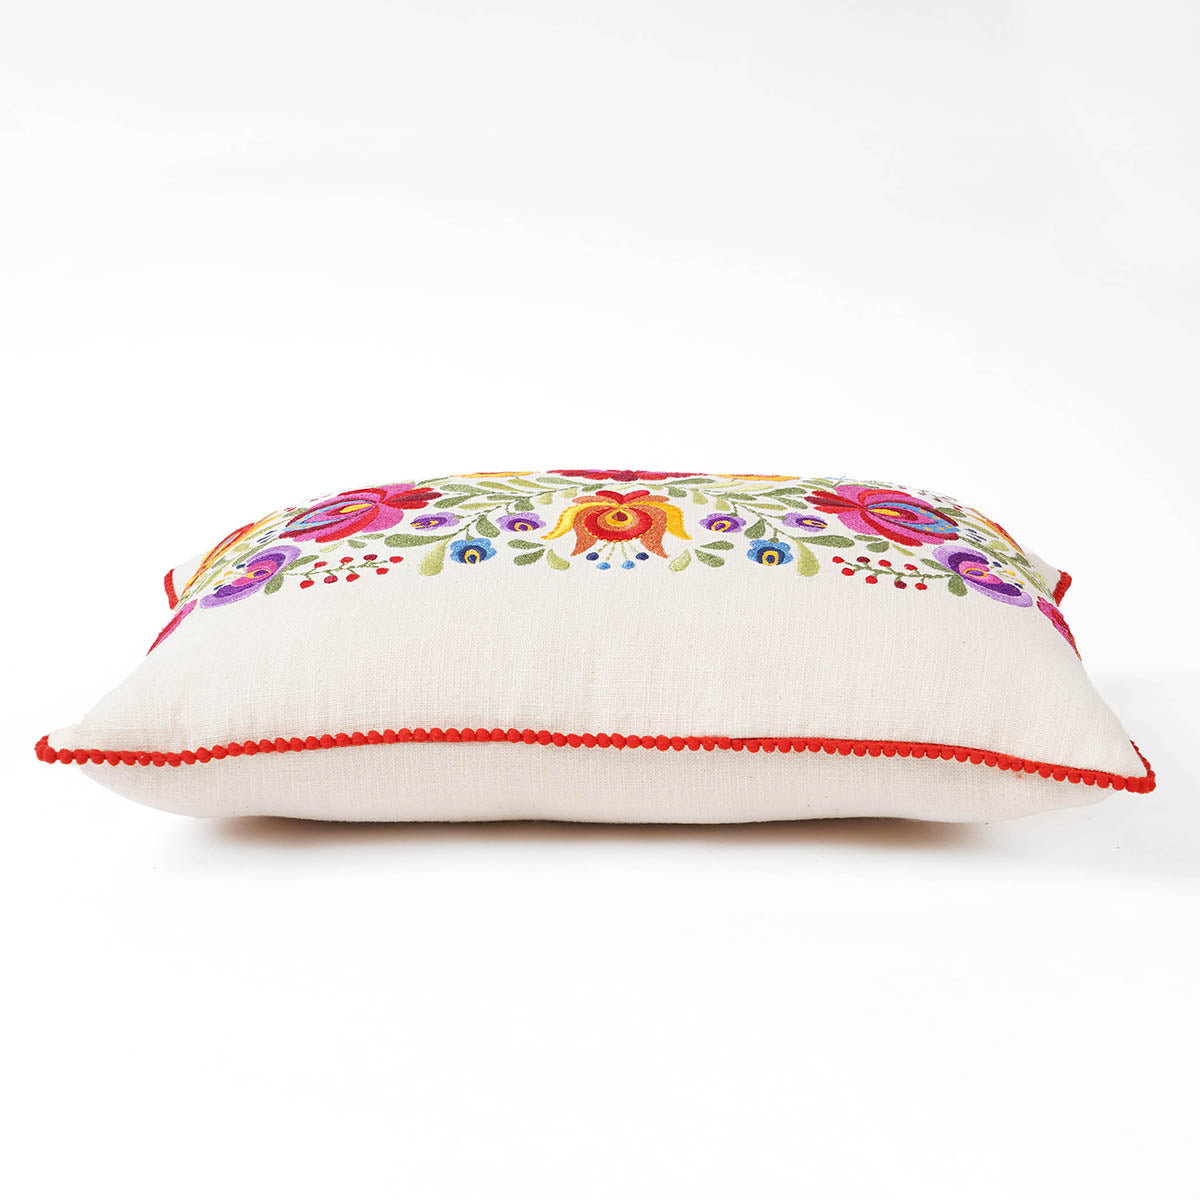 MATYO - Embroidered Oblong cotton Pillow cover with red micro pompom lace, sizes available